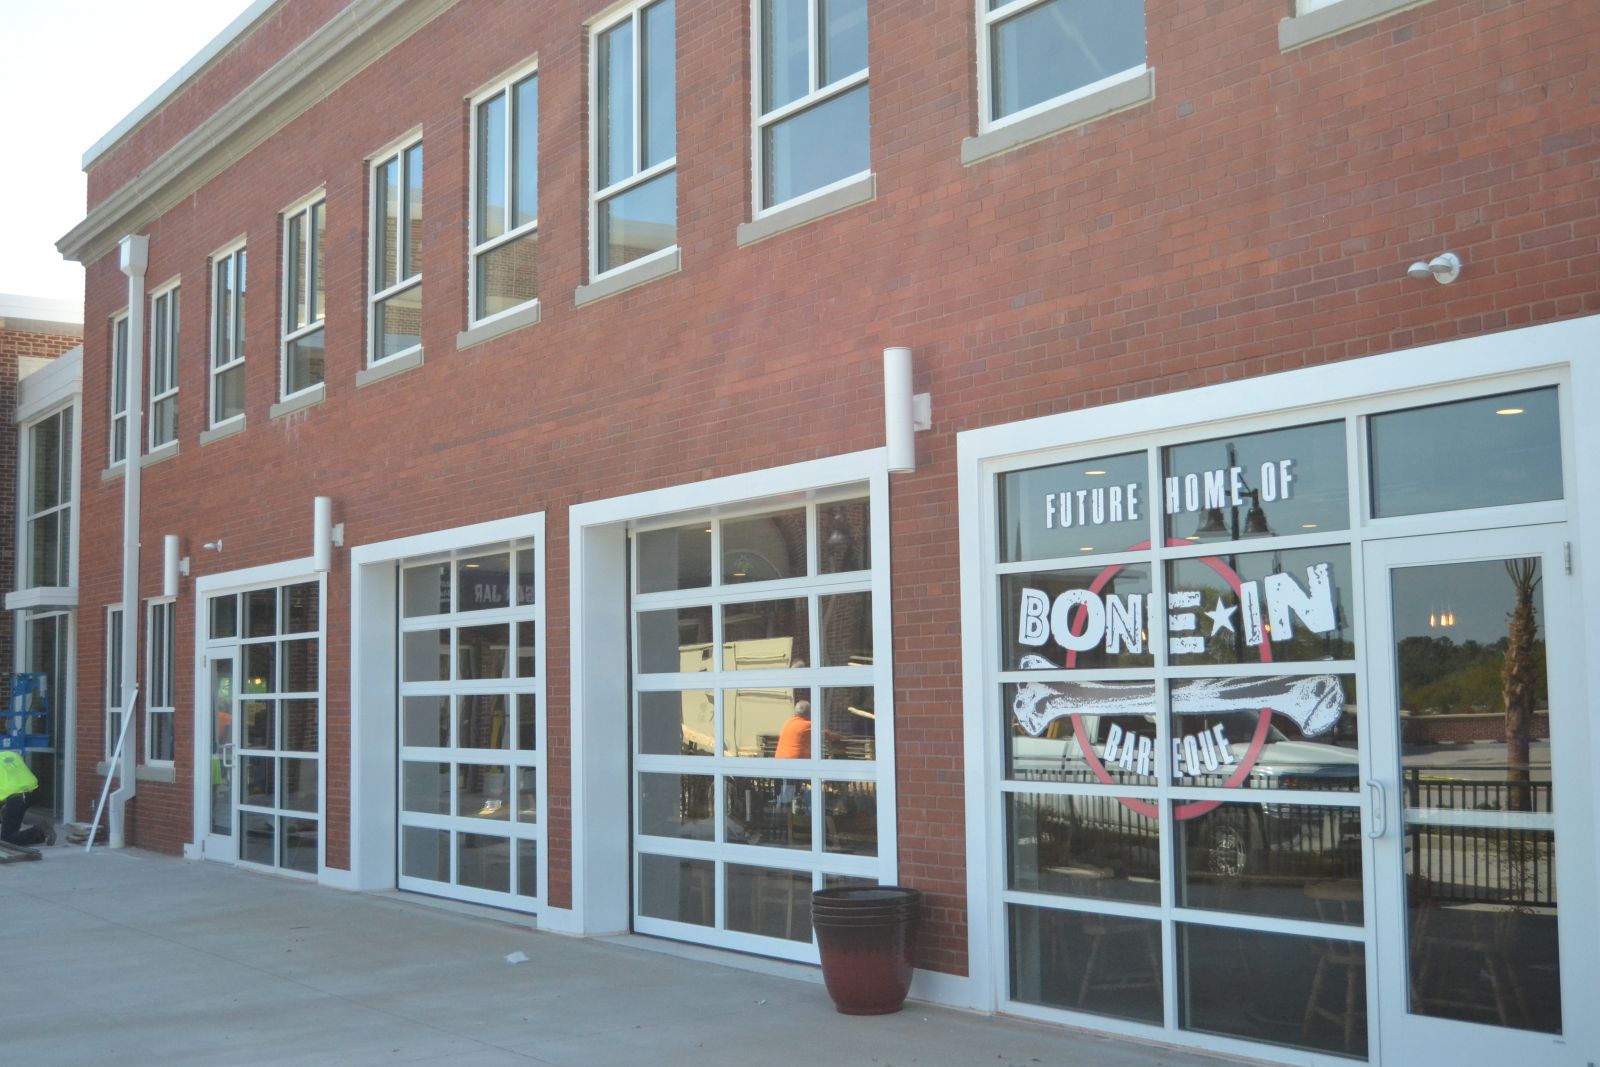 Bone-In-Barbeque will become the first restaurant at the Commons at BullStreet development, anchored by Spirit Communications Park. (Photo/Travis Boland)